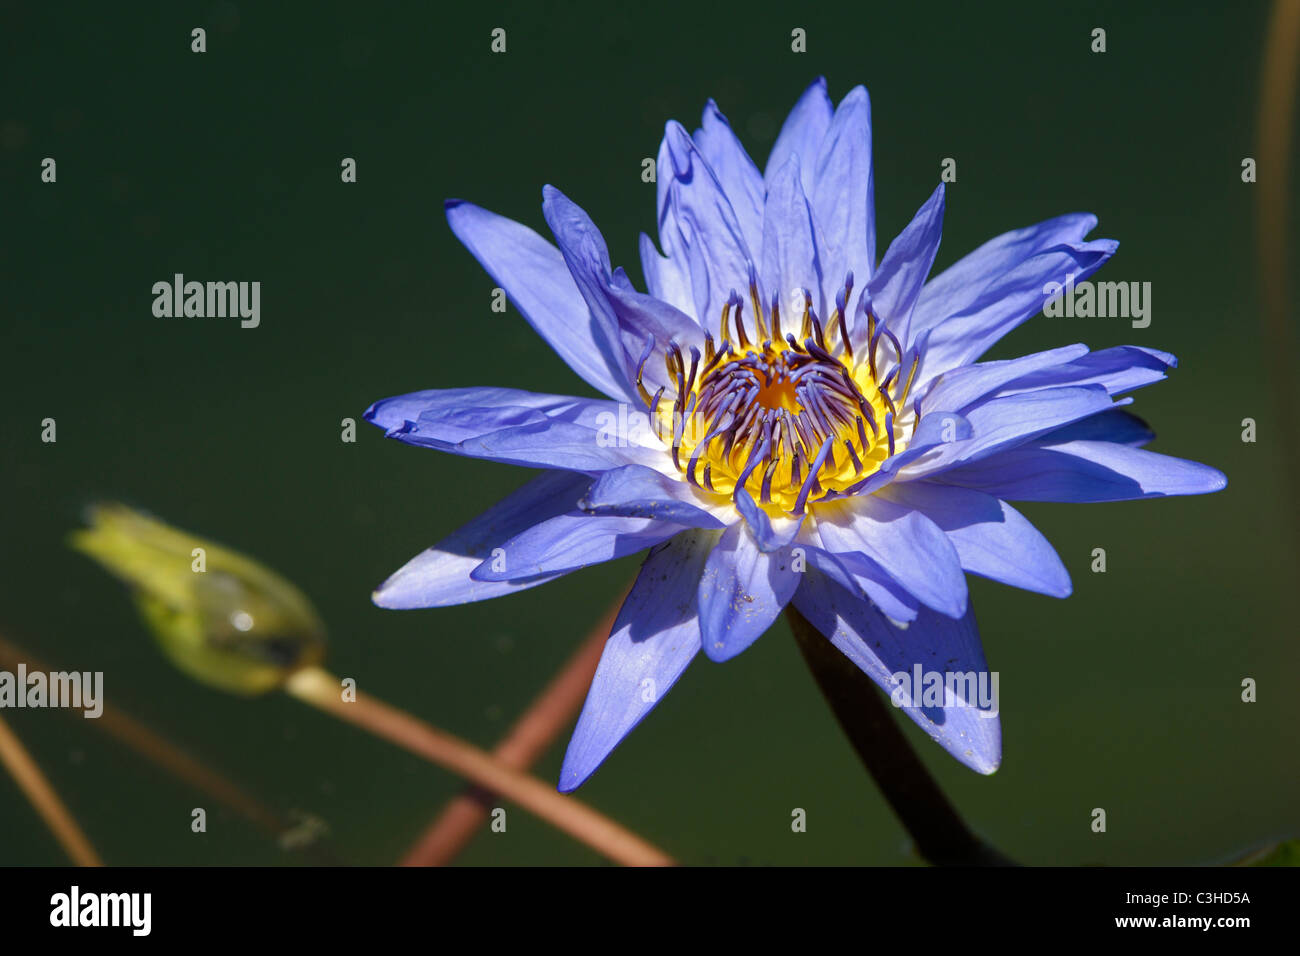 Seerose, Nymphaea sp., Water-lily, Deutschland, Germany Stock Photo